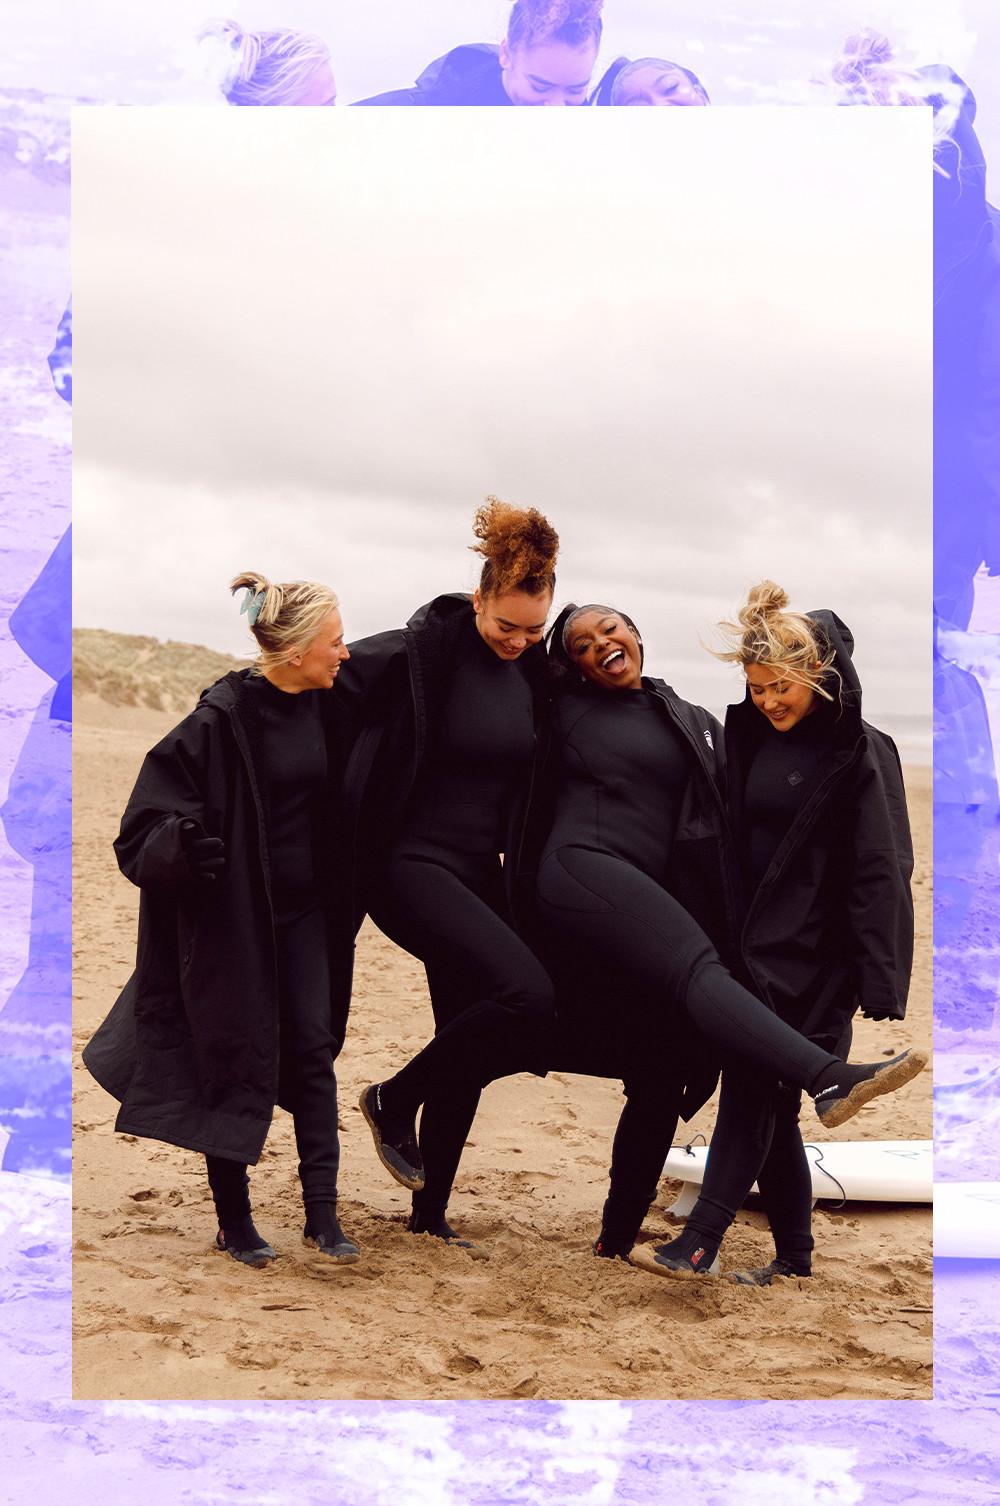 Influencers on the beach wearing black dry robes